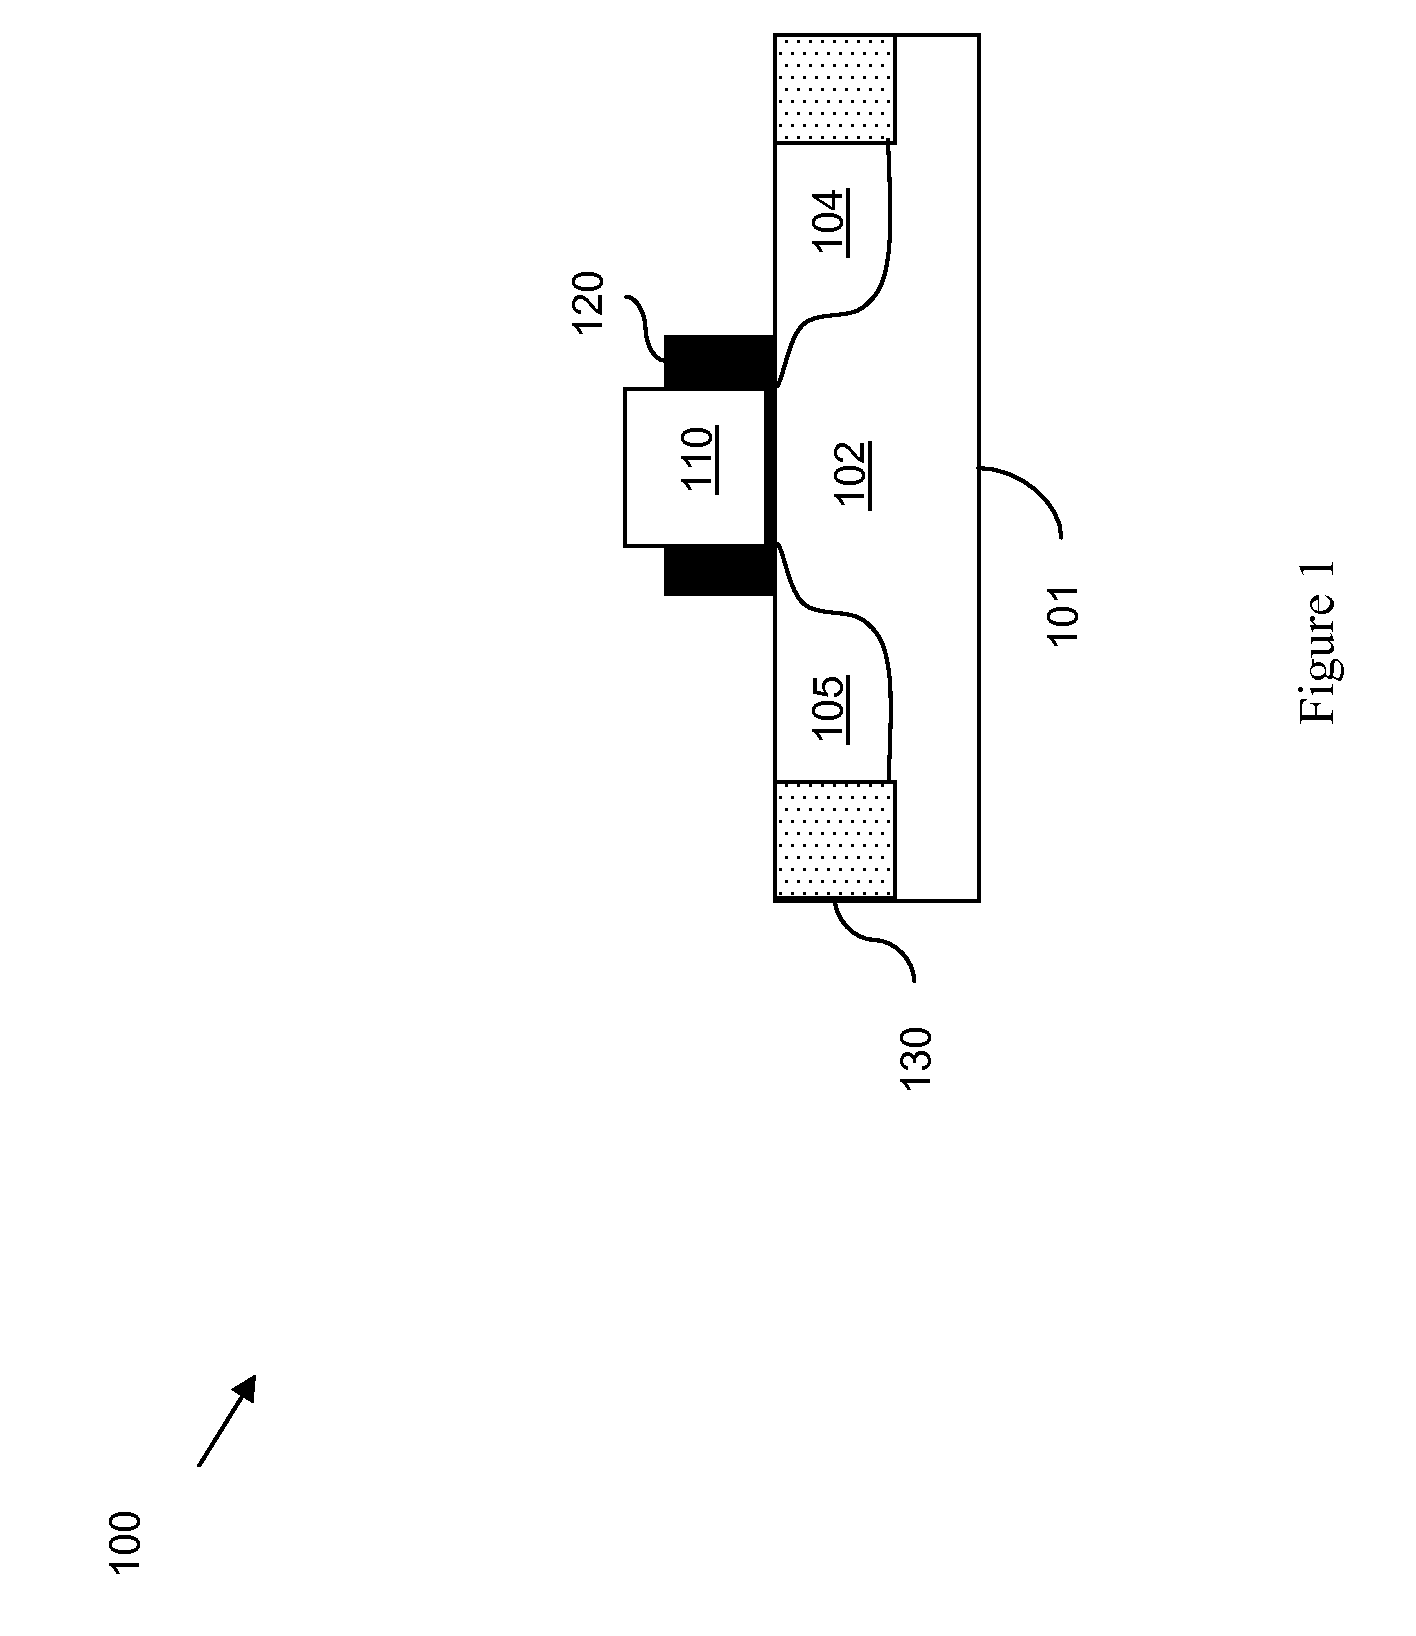 Asymmetric field effect transistor structure and method